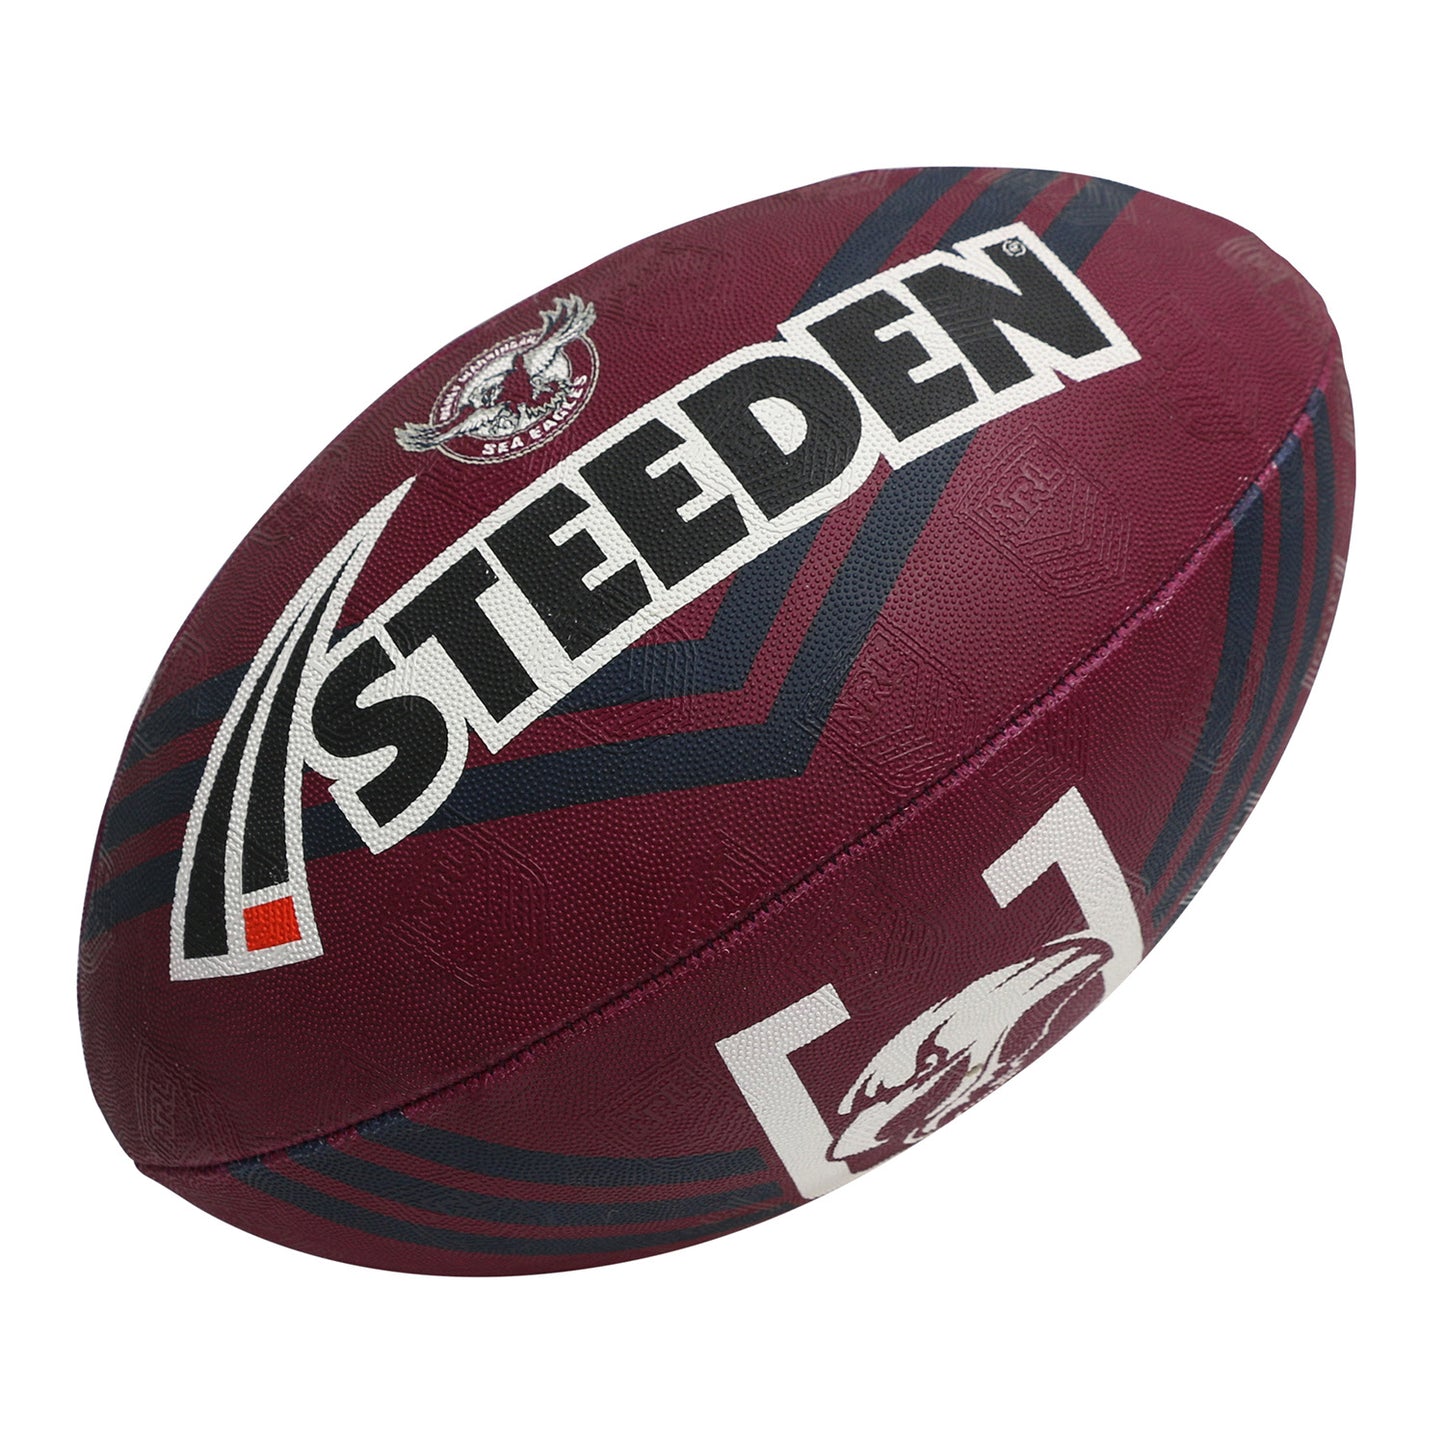 Manly-Warringah Sea Eagles Supporter Ball